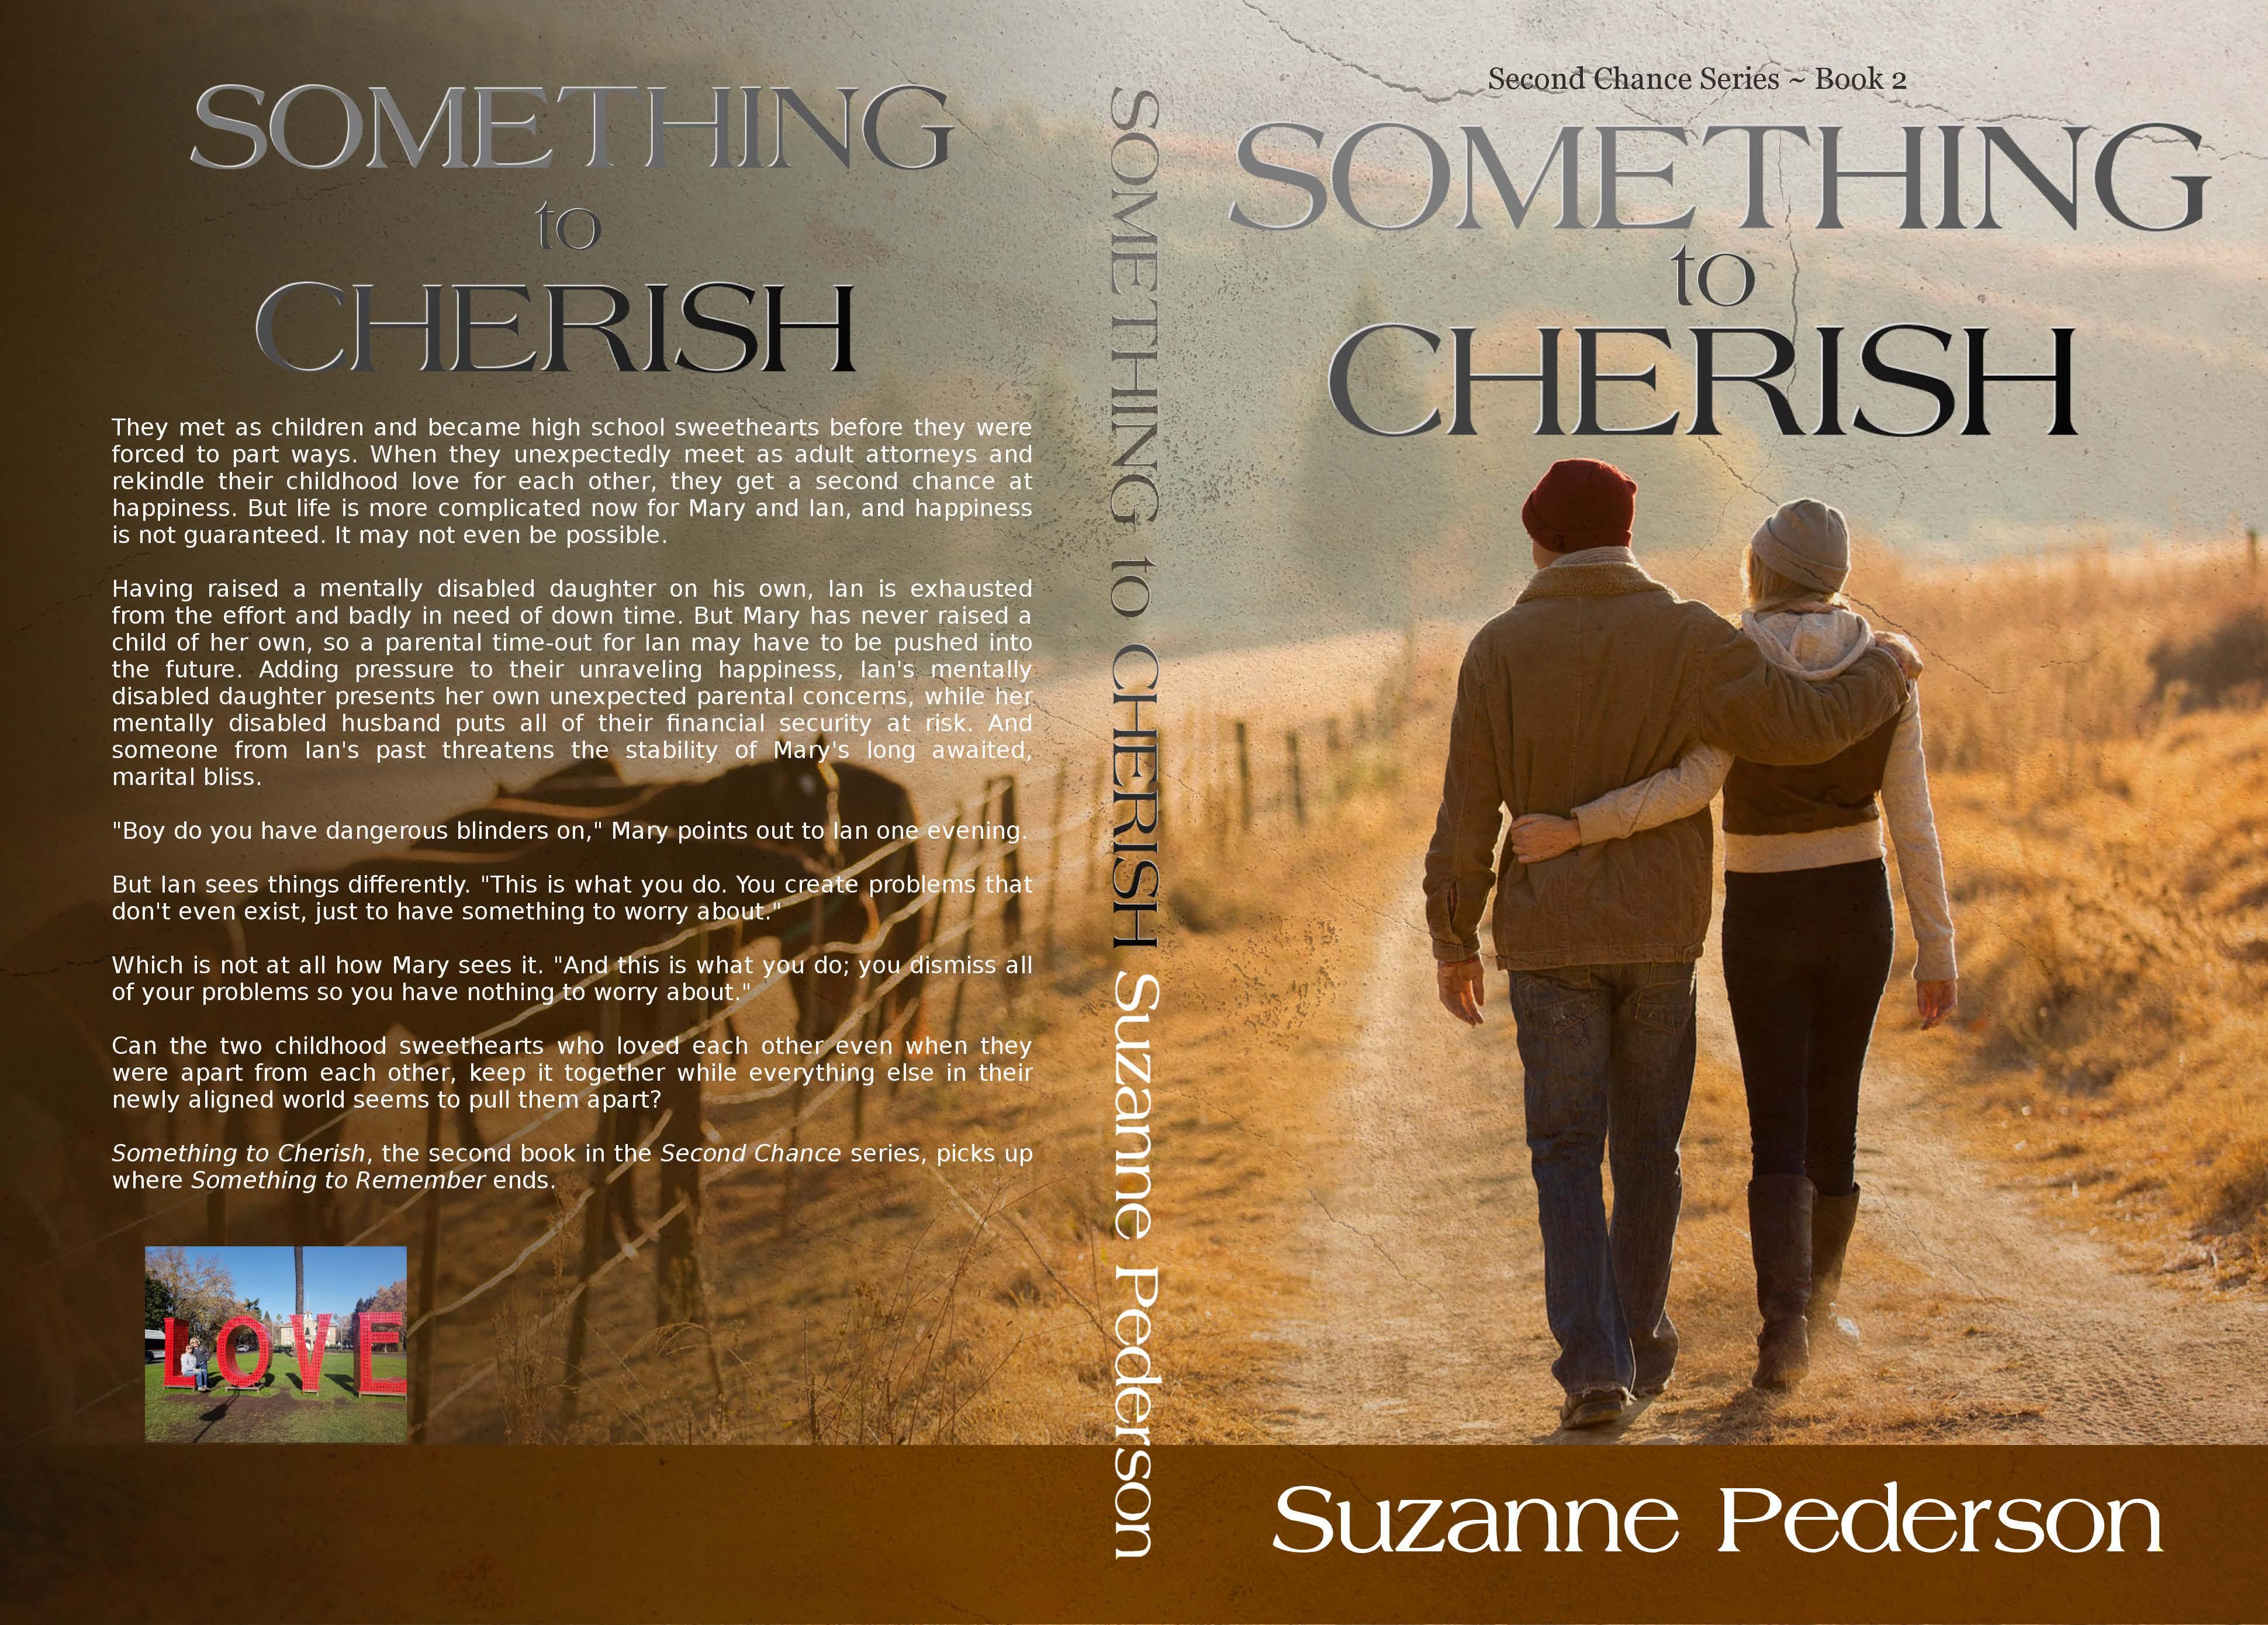 Something to Cherish - Book 2 in the Seconf Chance series.